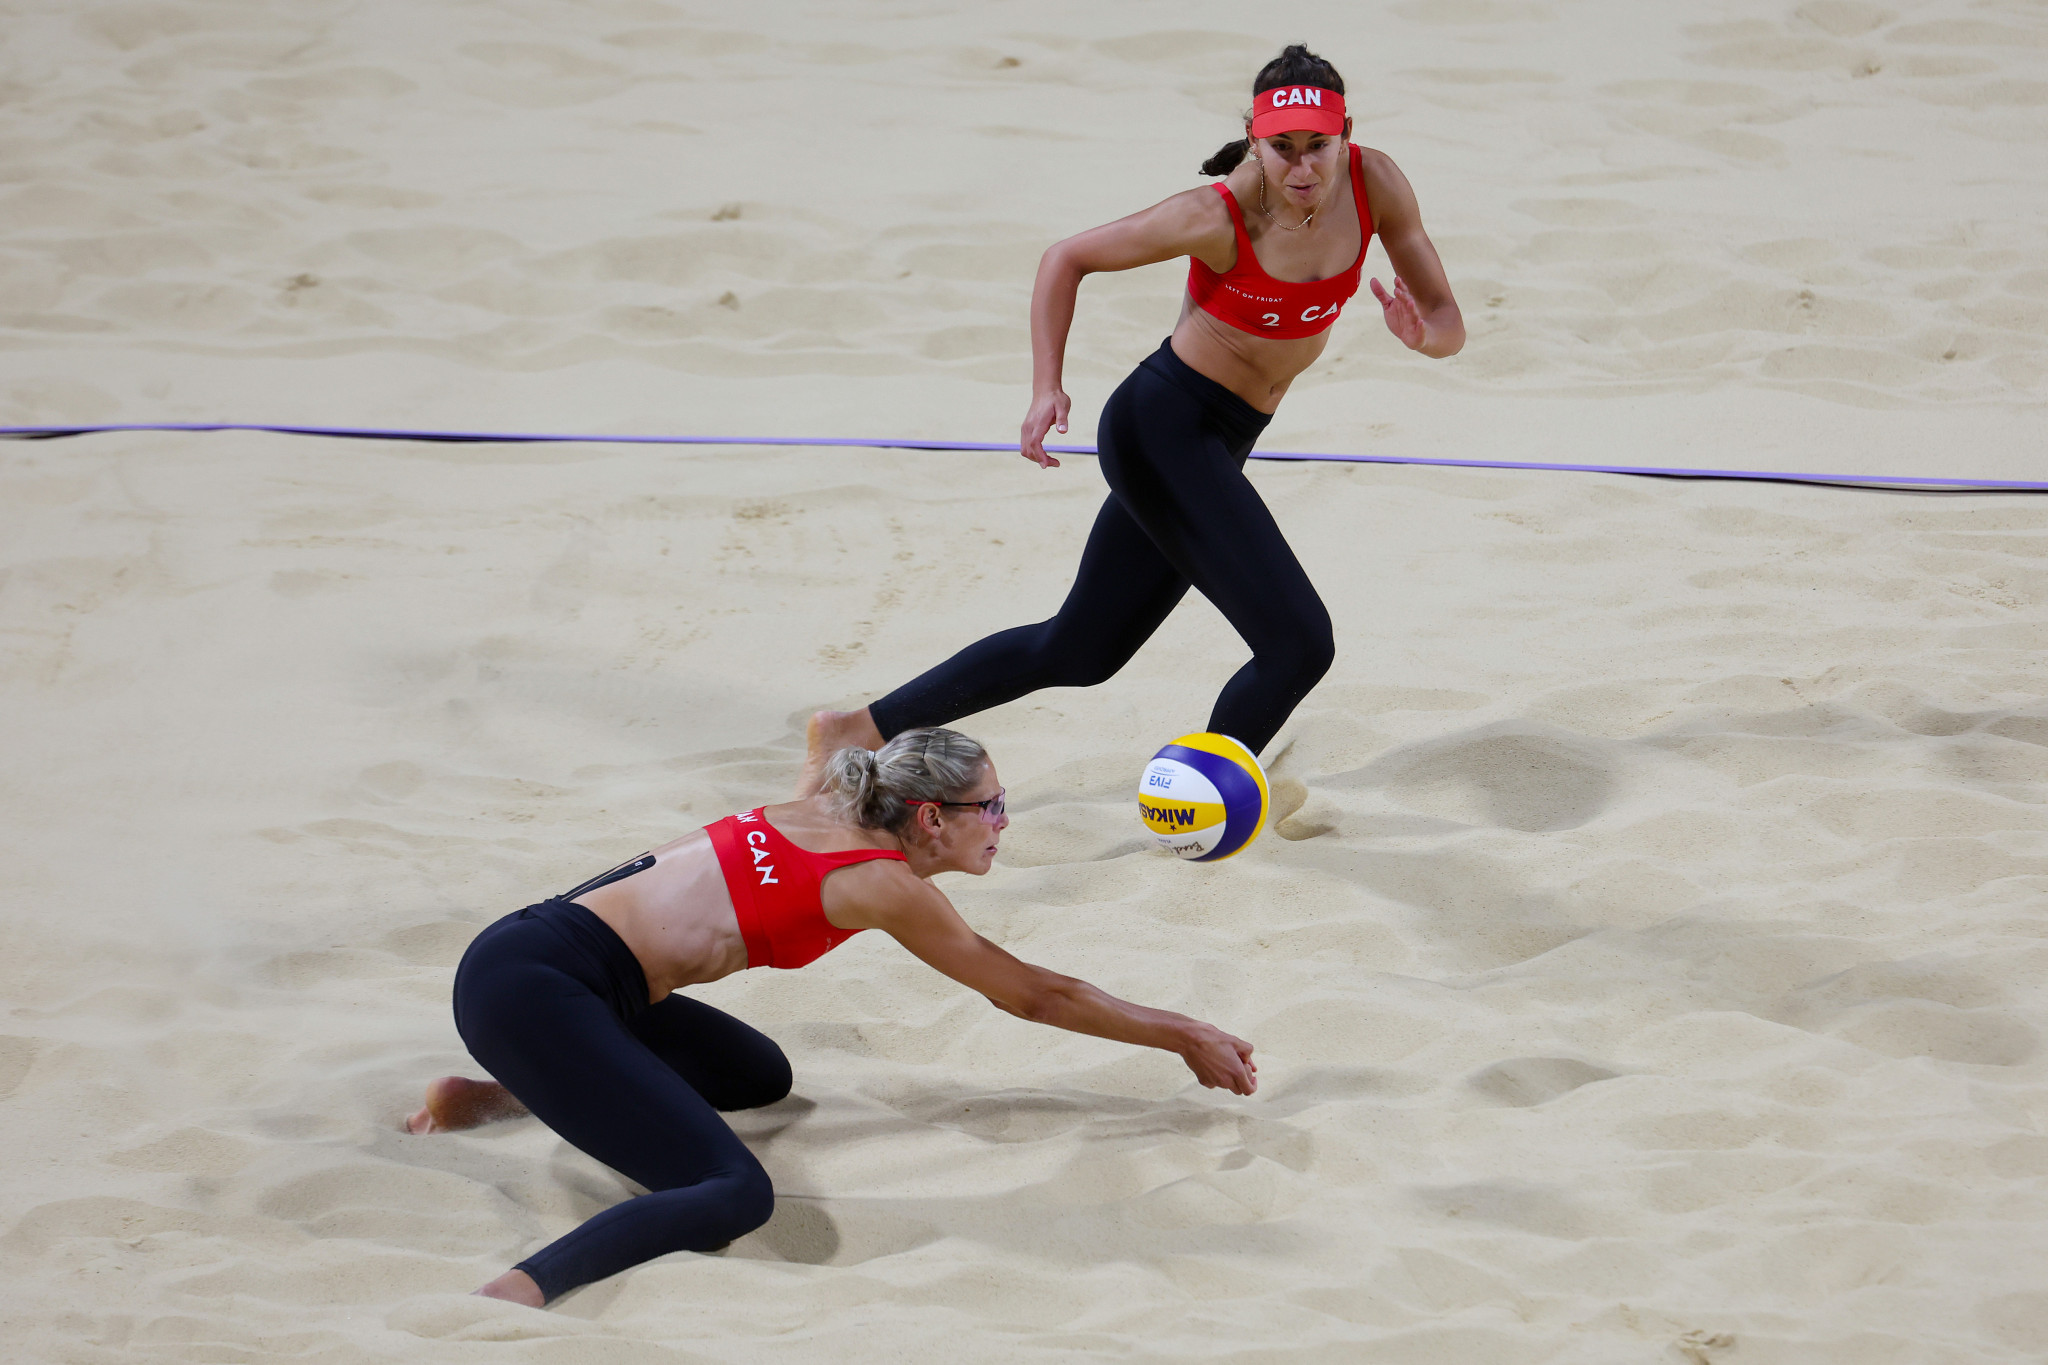 Melissa Humana-Paredes left, and Sarah Pavan retained their women's beach volleyball title from Gold Coast 2018 by beating Australia's Mariafe Artacho del Solar and Taliqua Clancy again ©Getty Images